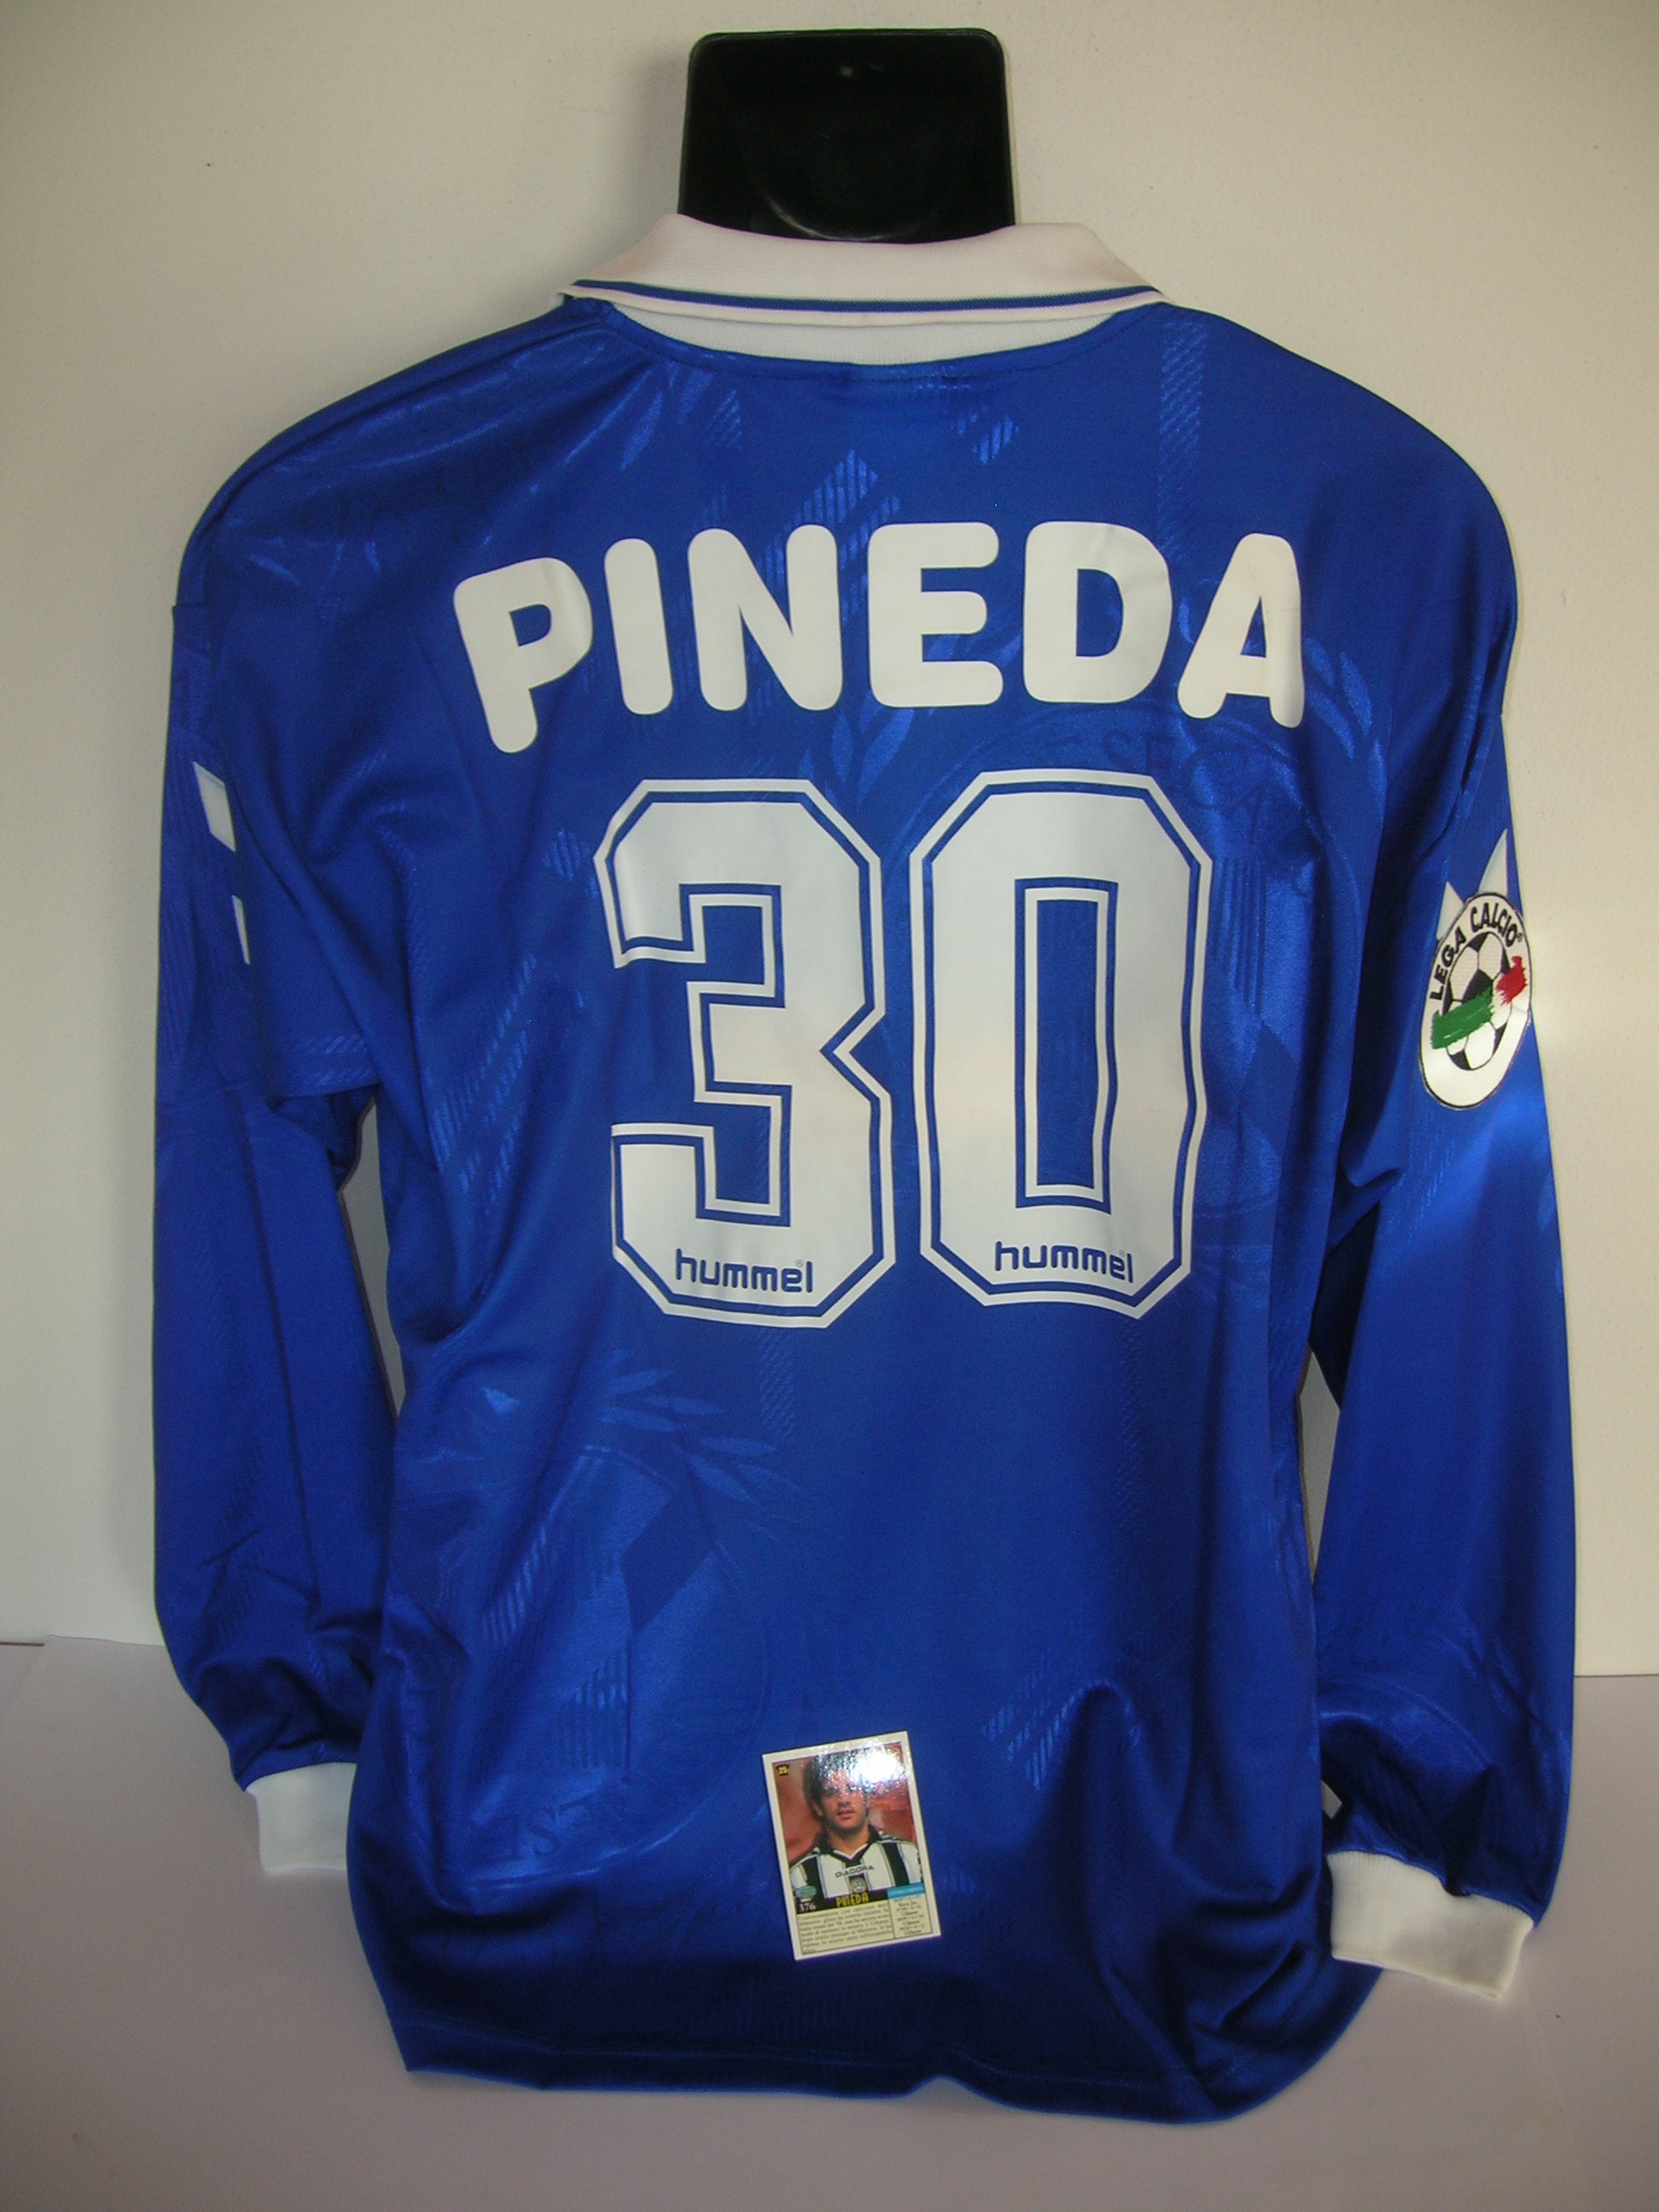 Udinese  Pineda  30  A-2